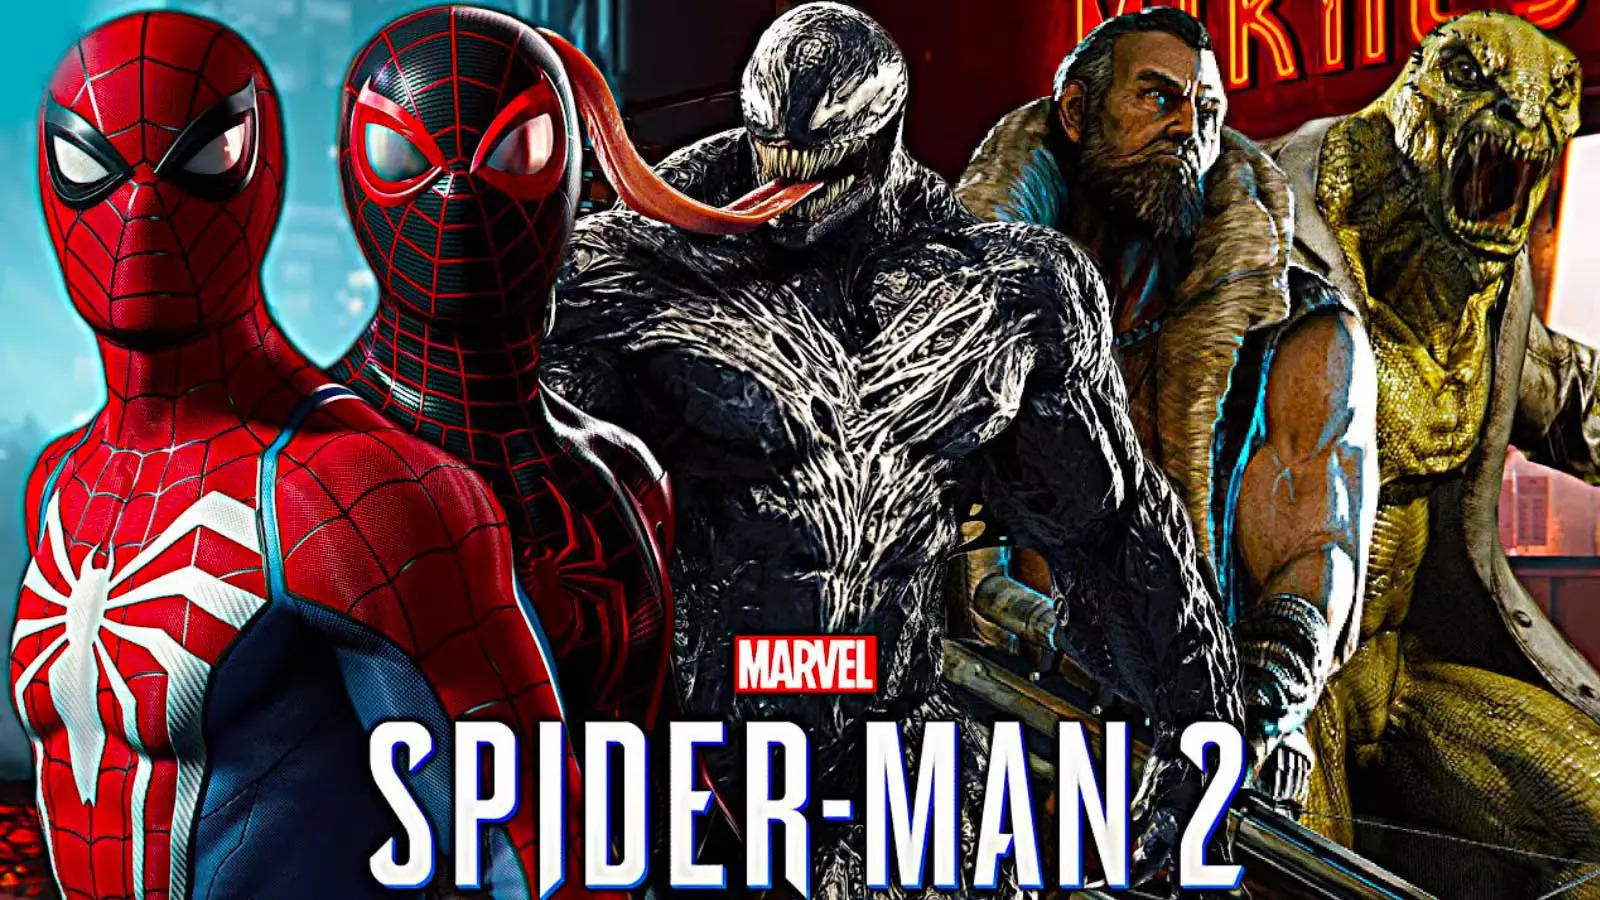 What Are The Detailed Information About This New Spider-Man 2 Game